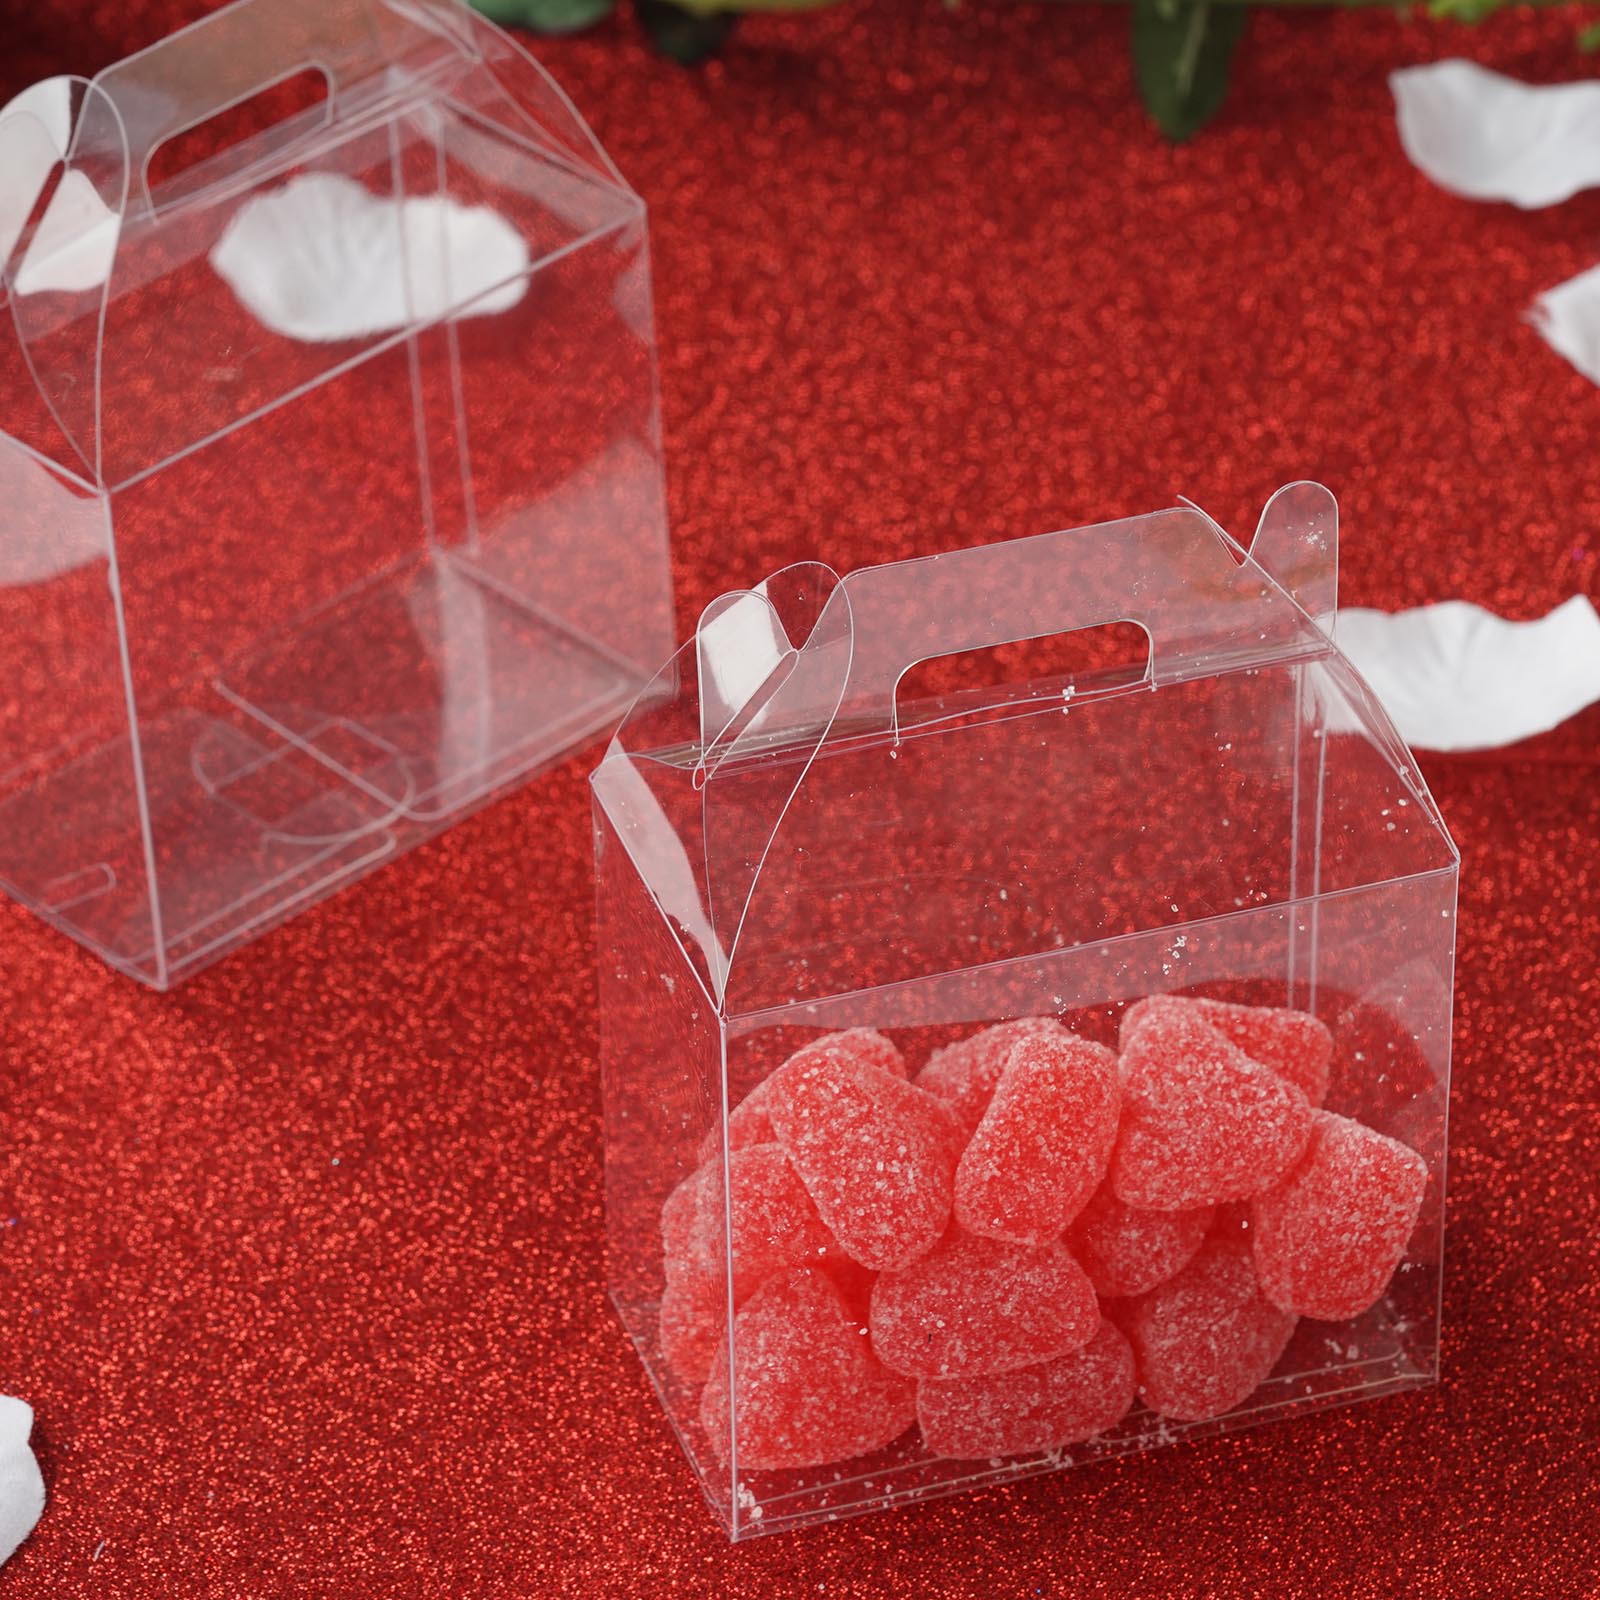 Efavormart 25 Pack Plastic Clear Treasure Chest Favor Candy Boxes - 4 inch x 2 inch x 3 inch for Bridal Shower Anniverary Wedding, Women's, Size: One